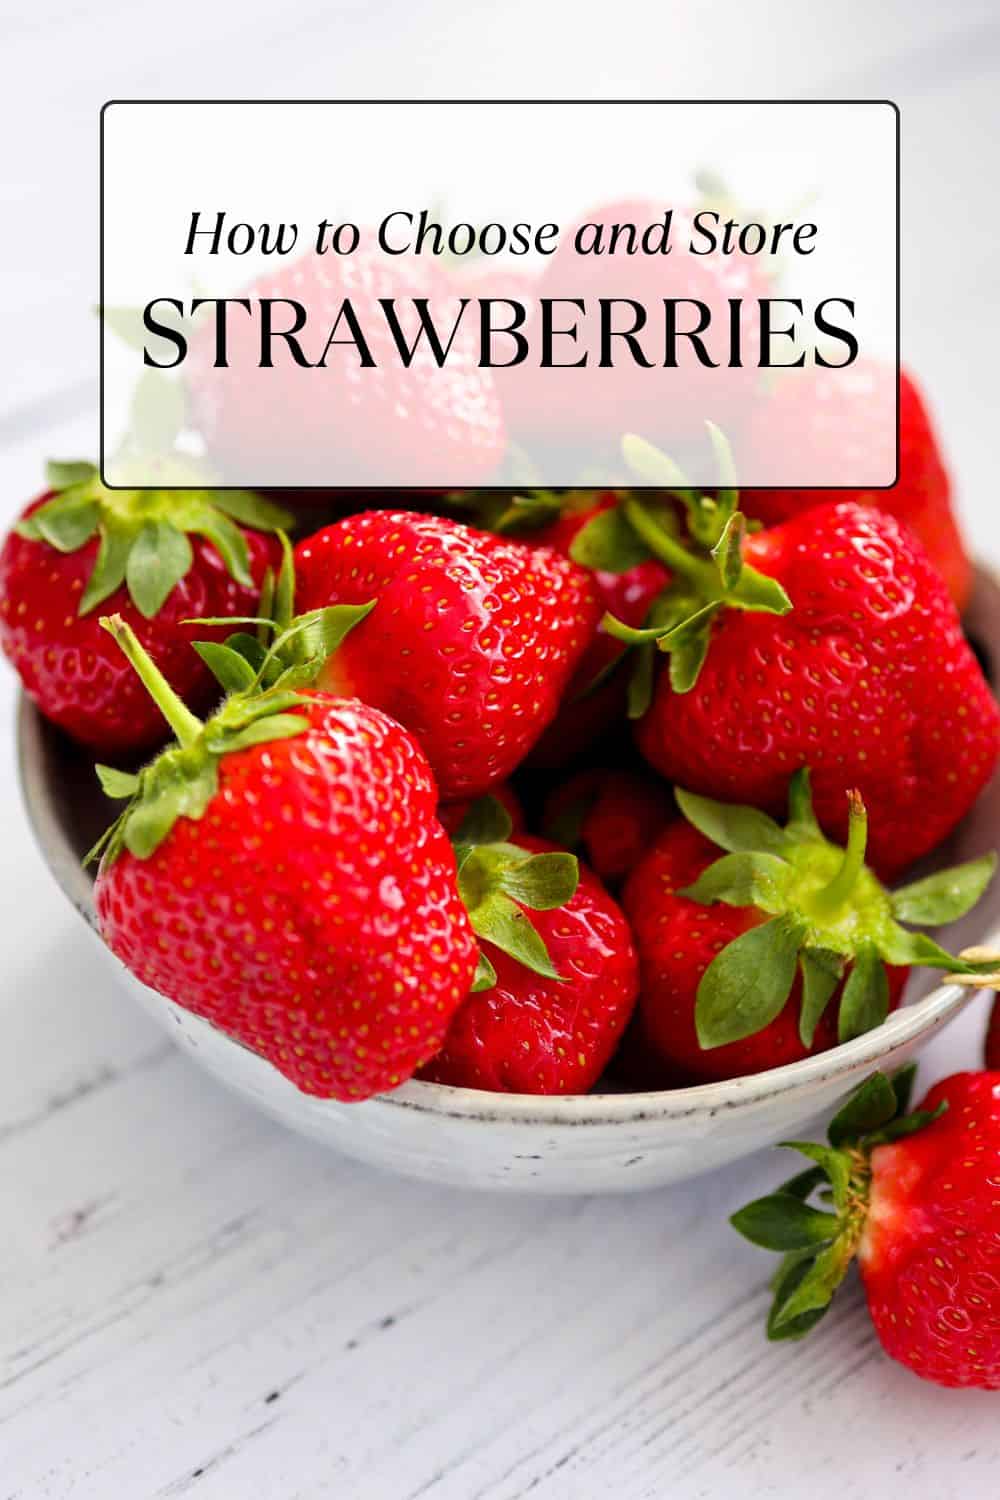 How to Choose and Store Strawberries